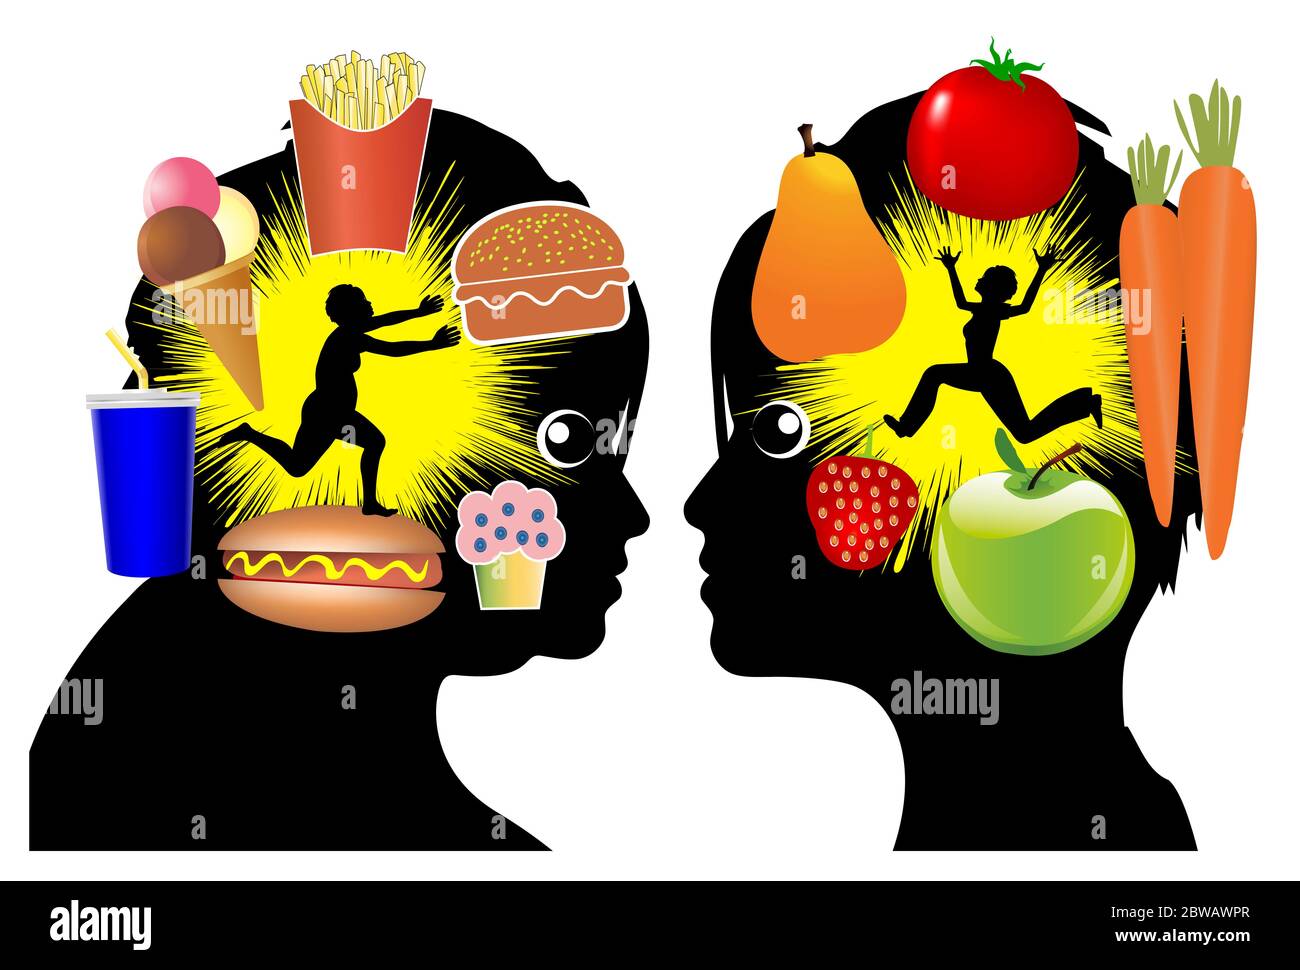 Eating desires change with weight loss, from unhealthy to health food. Stock Photo